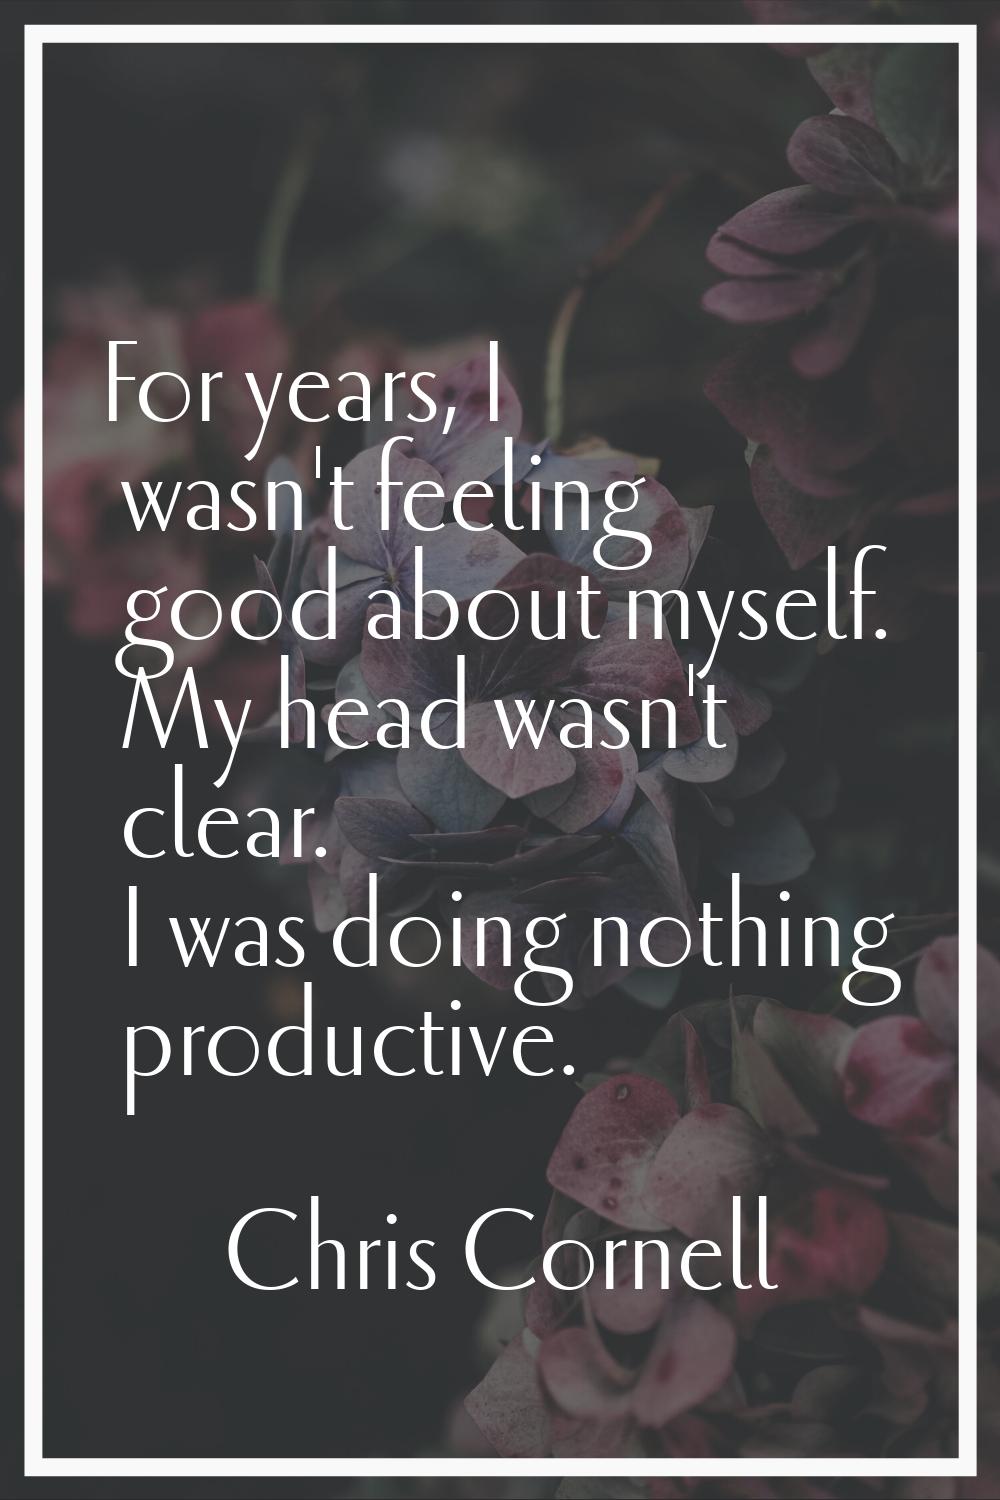 For years, I wasn't feeling good about myself. My head wasn't clear. I was doing nothing productive